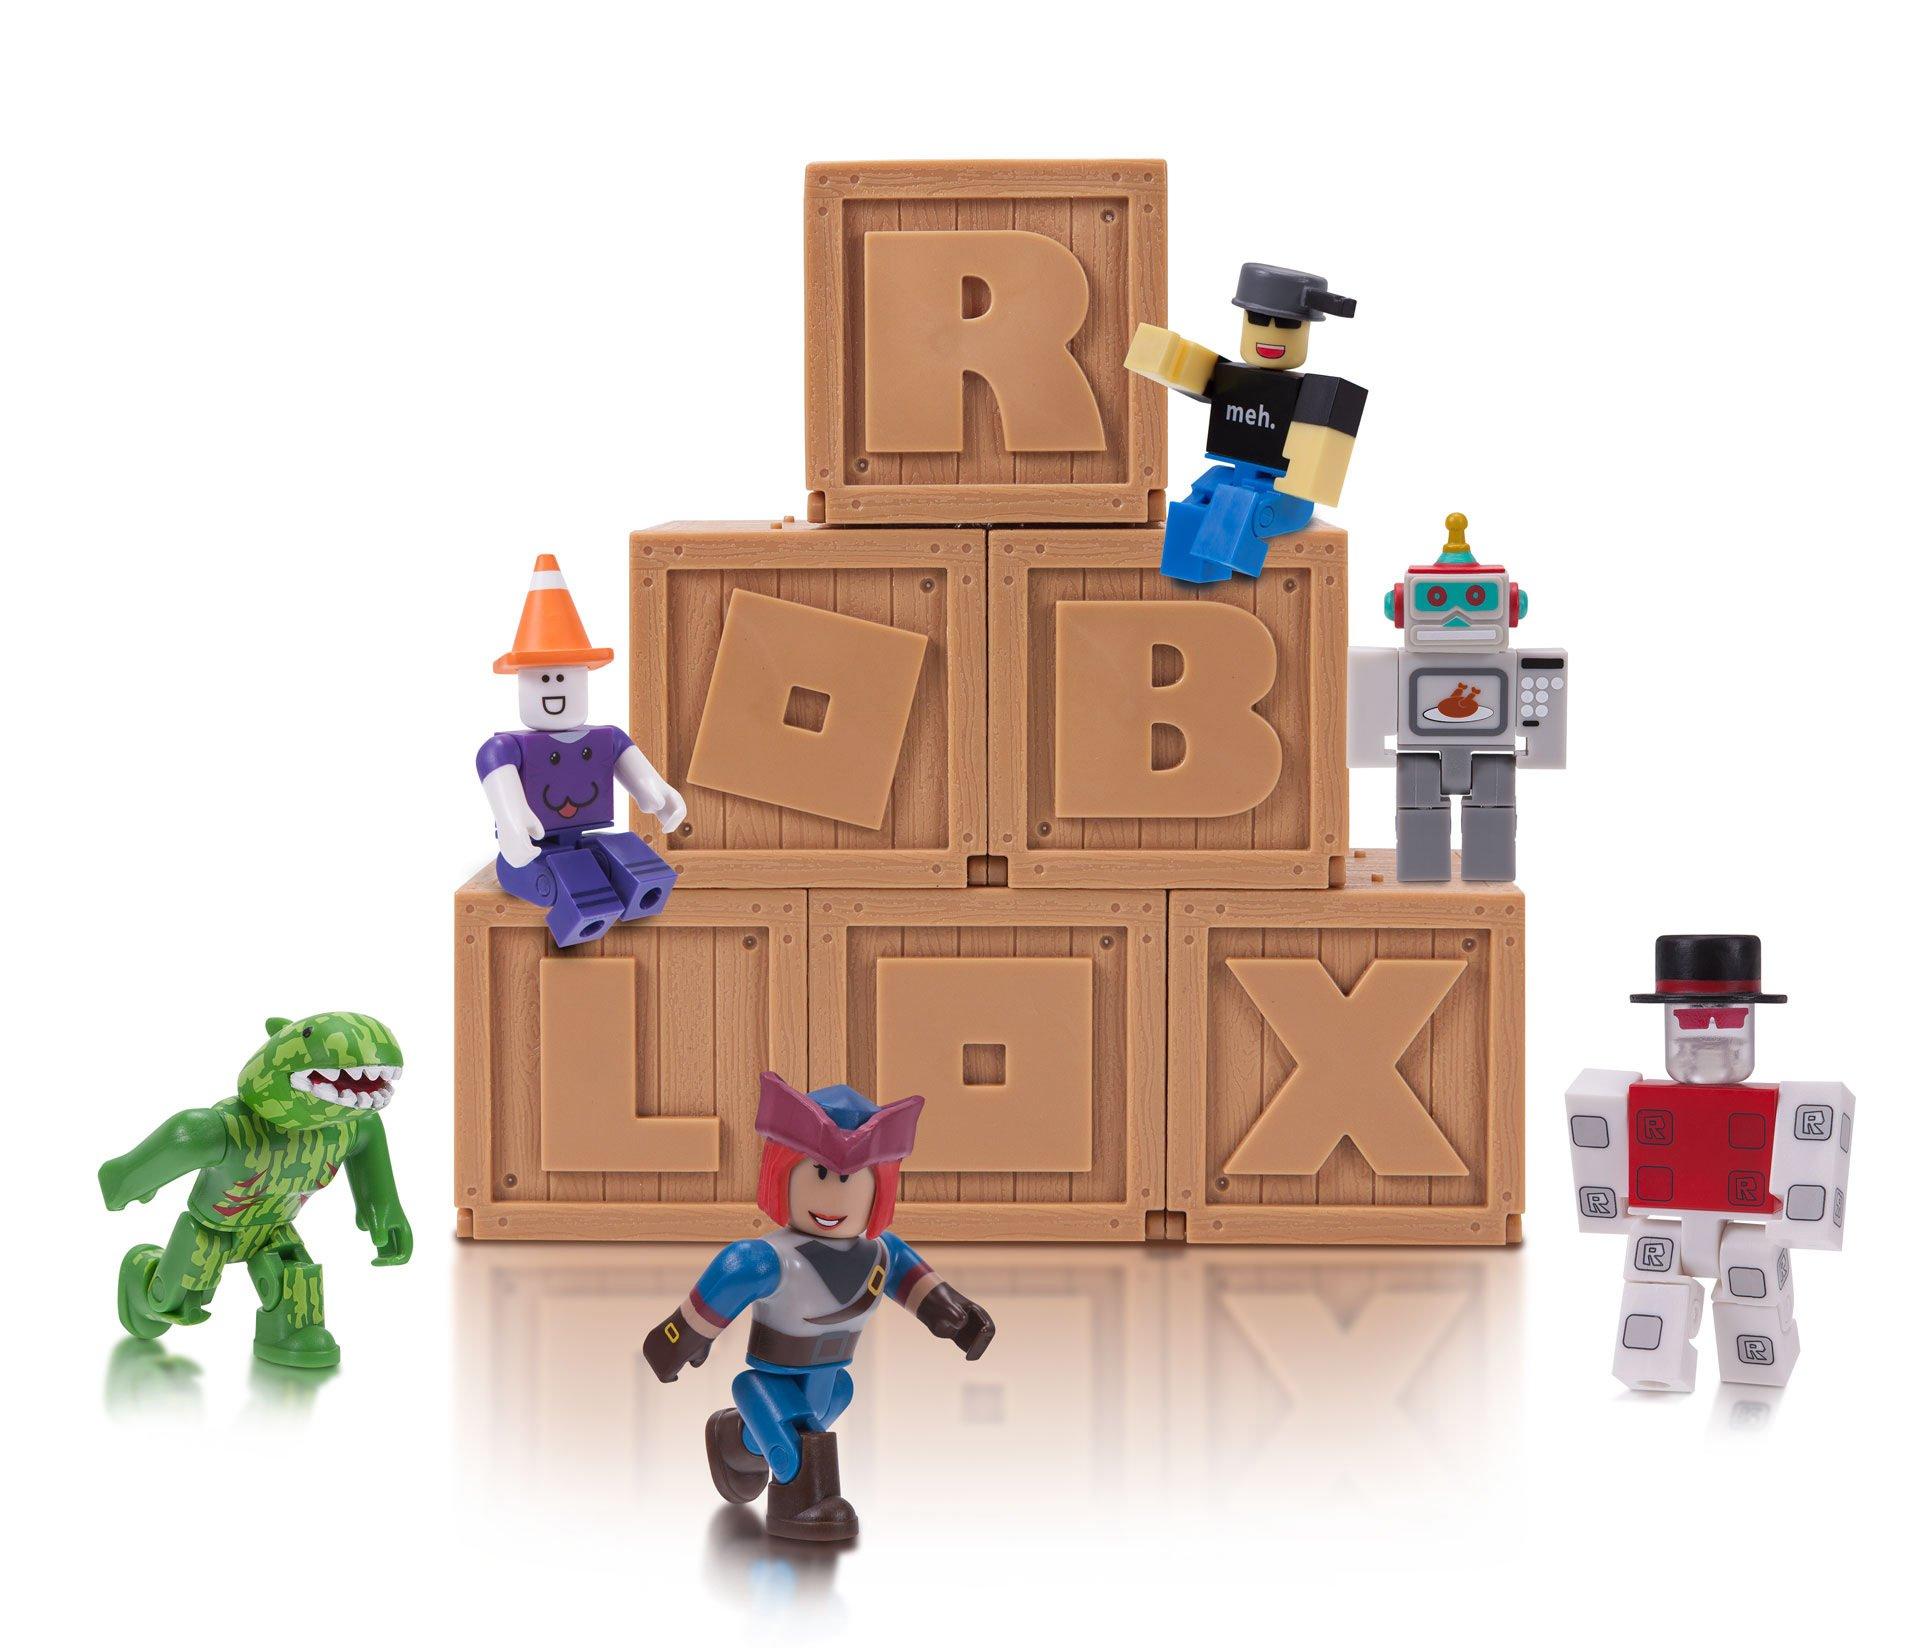 Roblox Action Figure Classic Series 2 Character Pack For Kid S Toy Gift Mini Toy Action Figures Fzgil Toys Hobbies - roblox toys series 2 codes